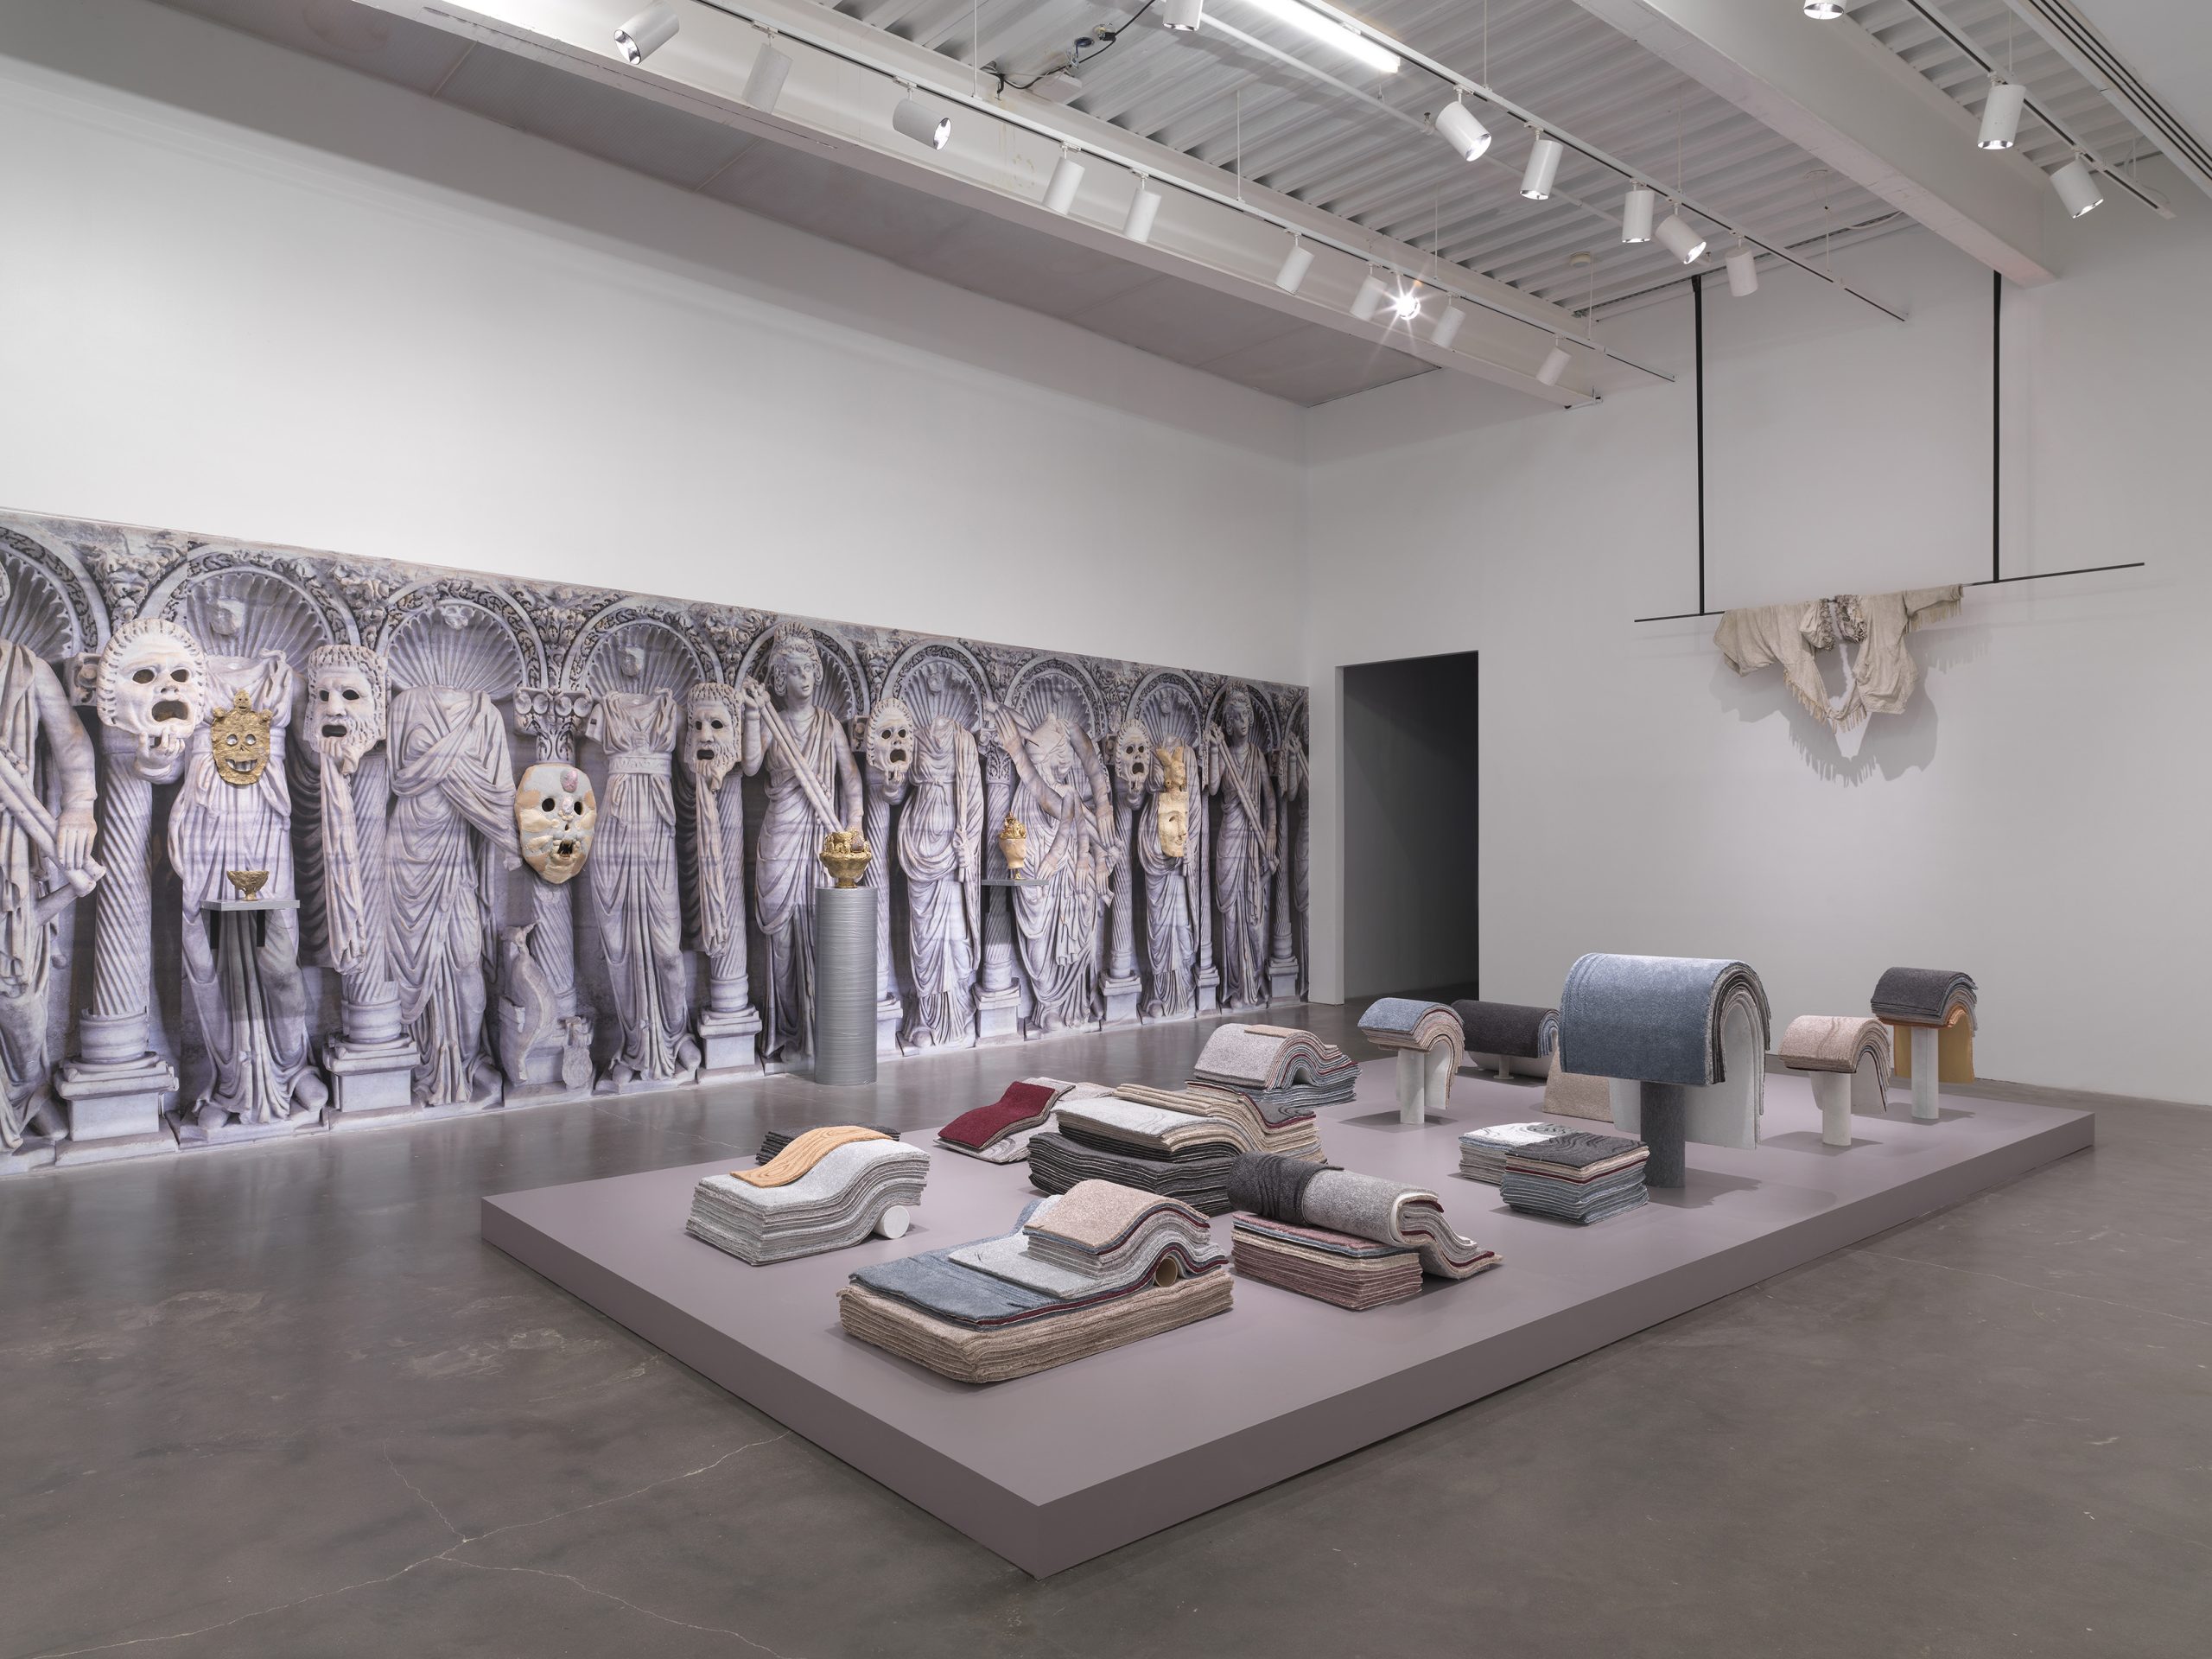 Nothing Further Beyond, 2021, Installation view New Museum “2021 Triennial: Soft Water Hard Stone,” New York Photo: Dario Lasagni. Courtesy: The artist and Green Art Gallery Dubai